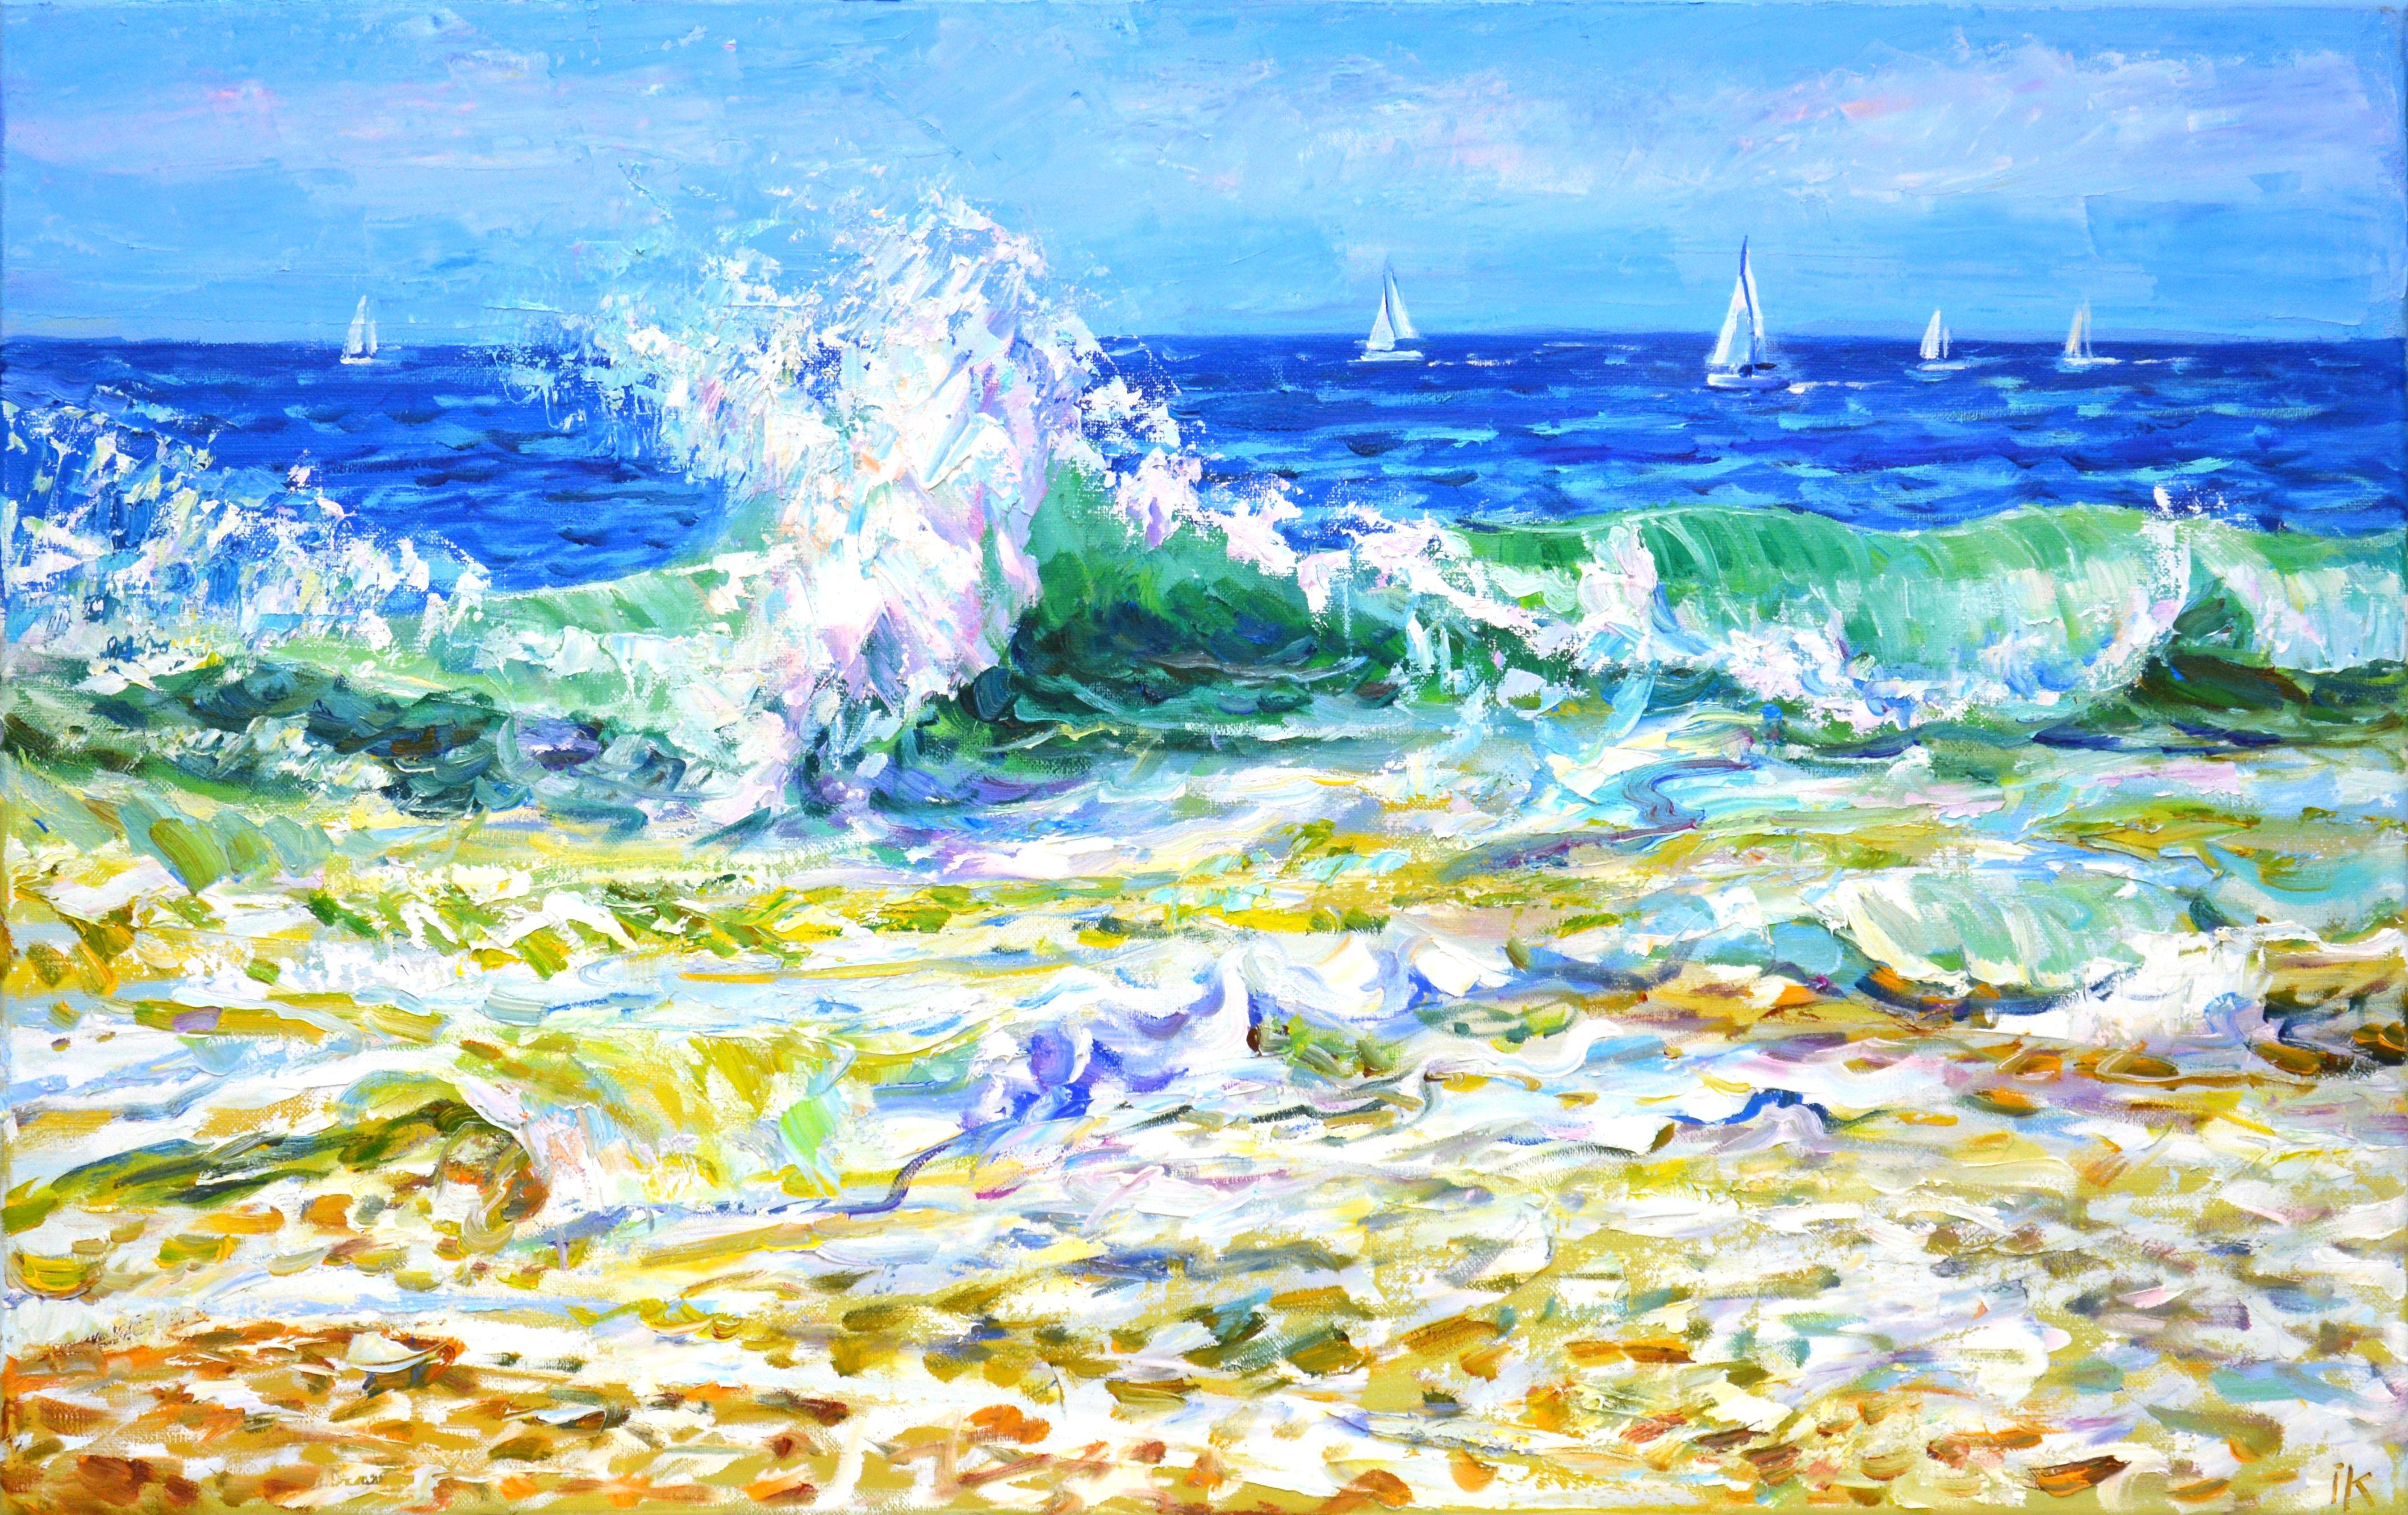 Sailboats float on the horizon, the sky is clear overhead, daylight is reflected in the oncoming waves. A rich palette of blue, green, white colors emphasizes the energy of the sea. Impressionism. The luminous qualities of the ocean and the amazing